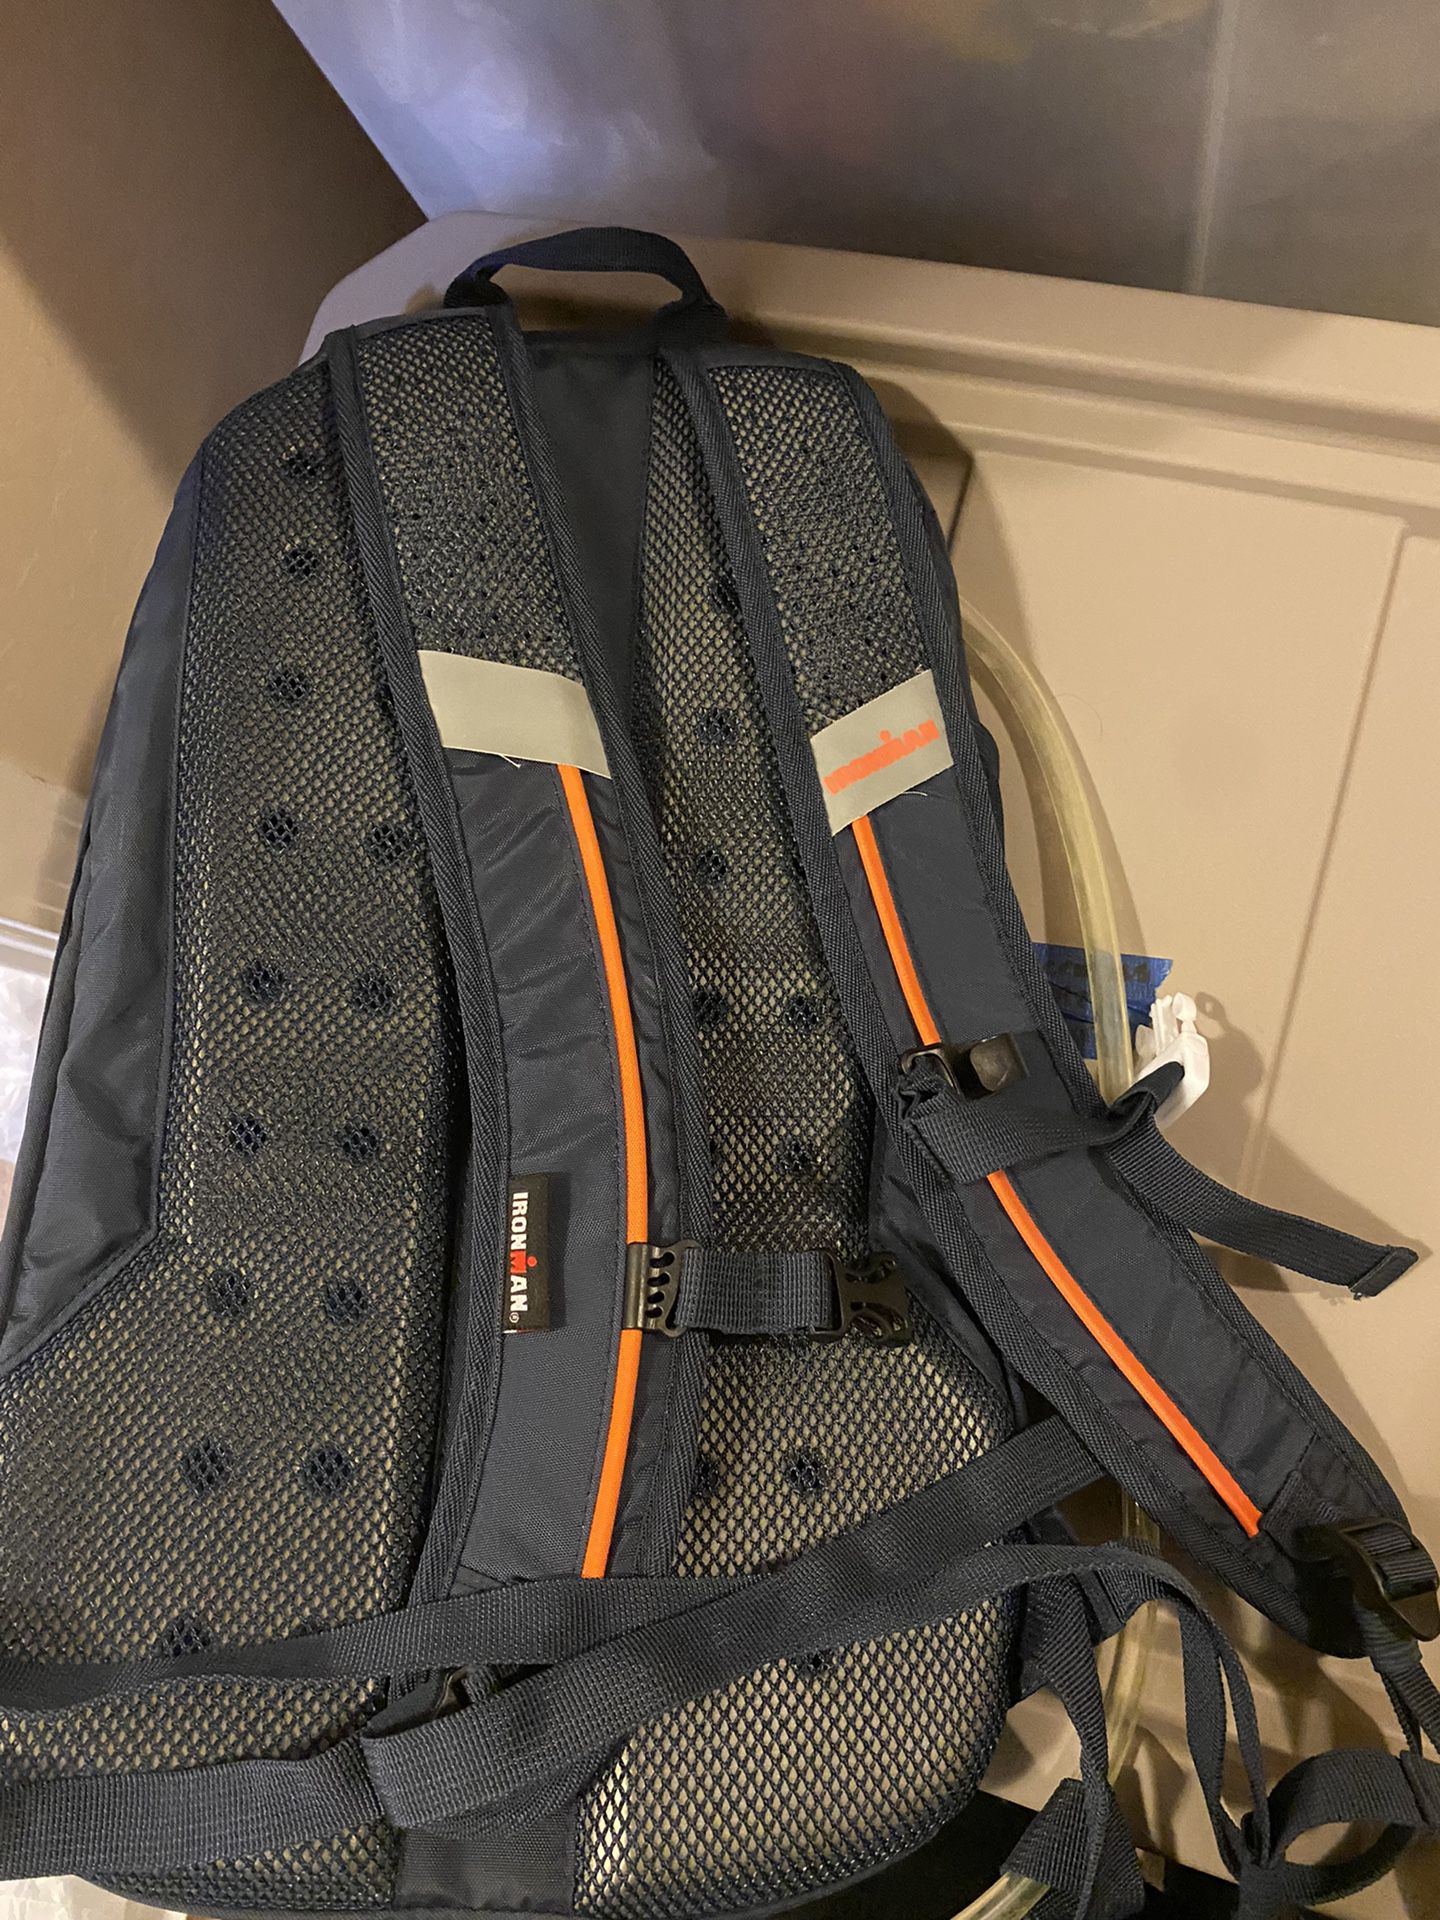 IRONMAN Hydration Backpack